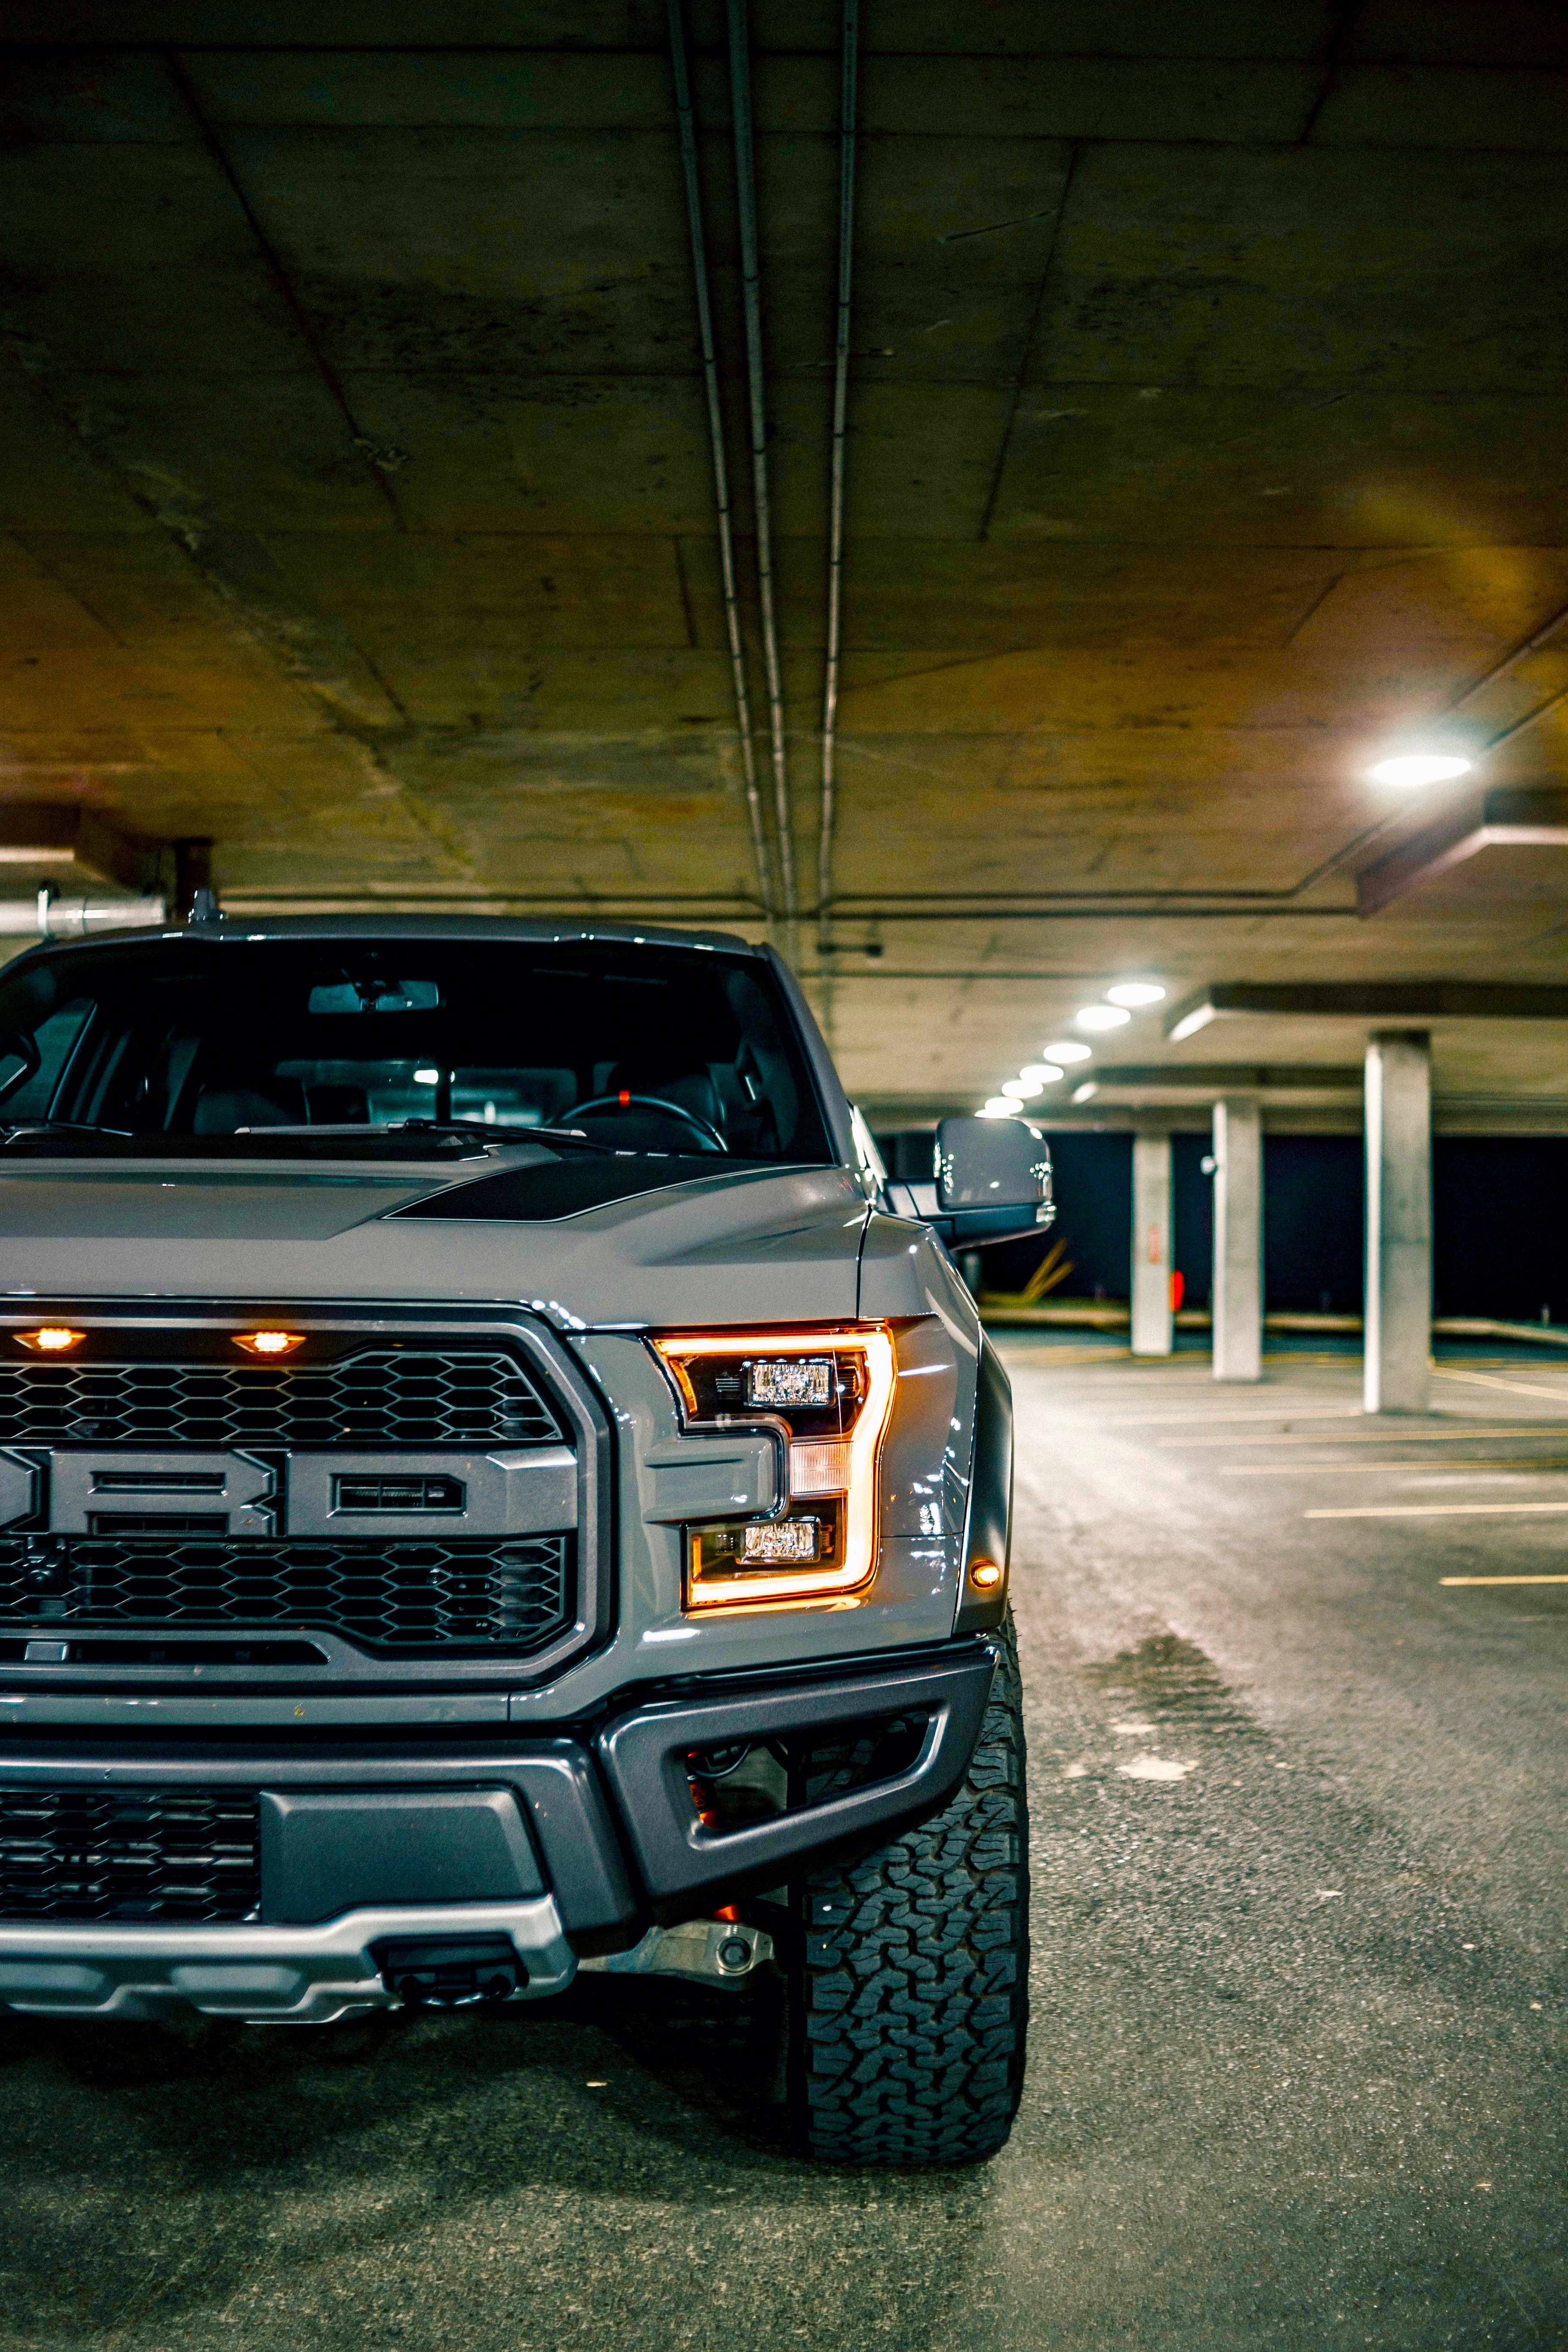 ford raptor, ford, suv, front view, car, cars, grey, parking iphone wallpaper